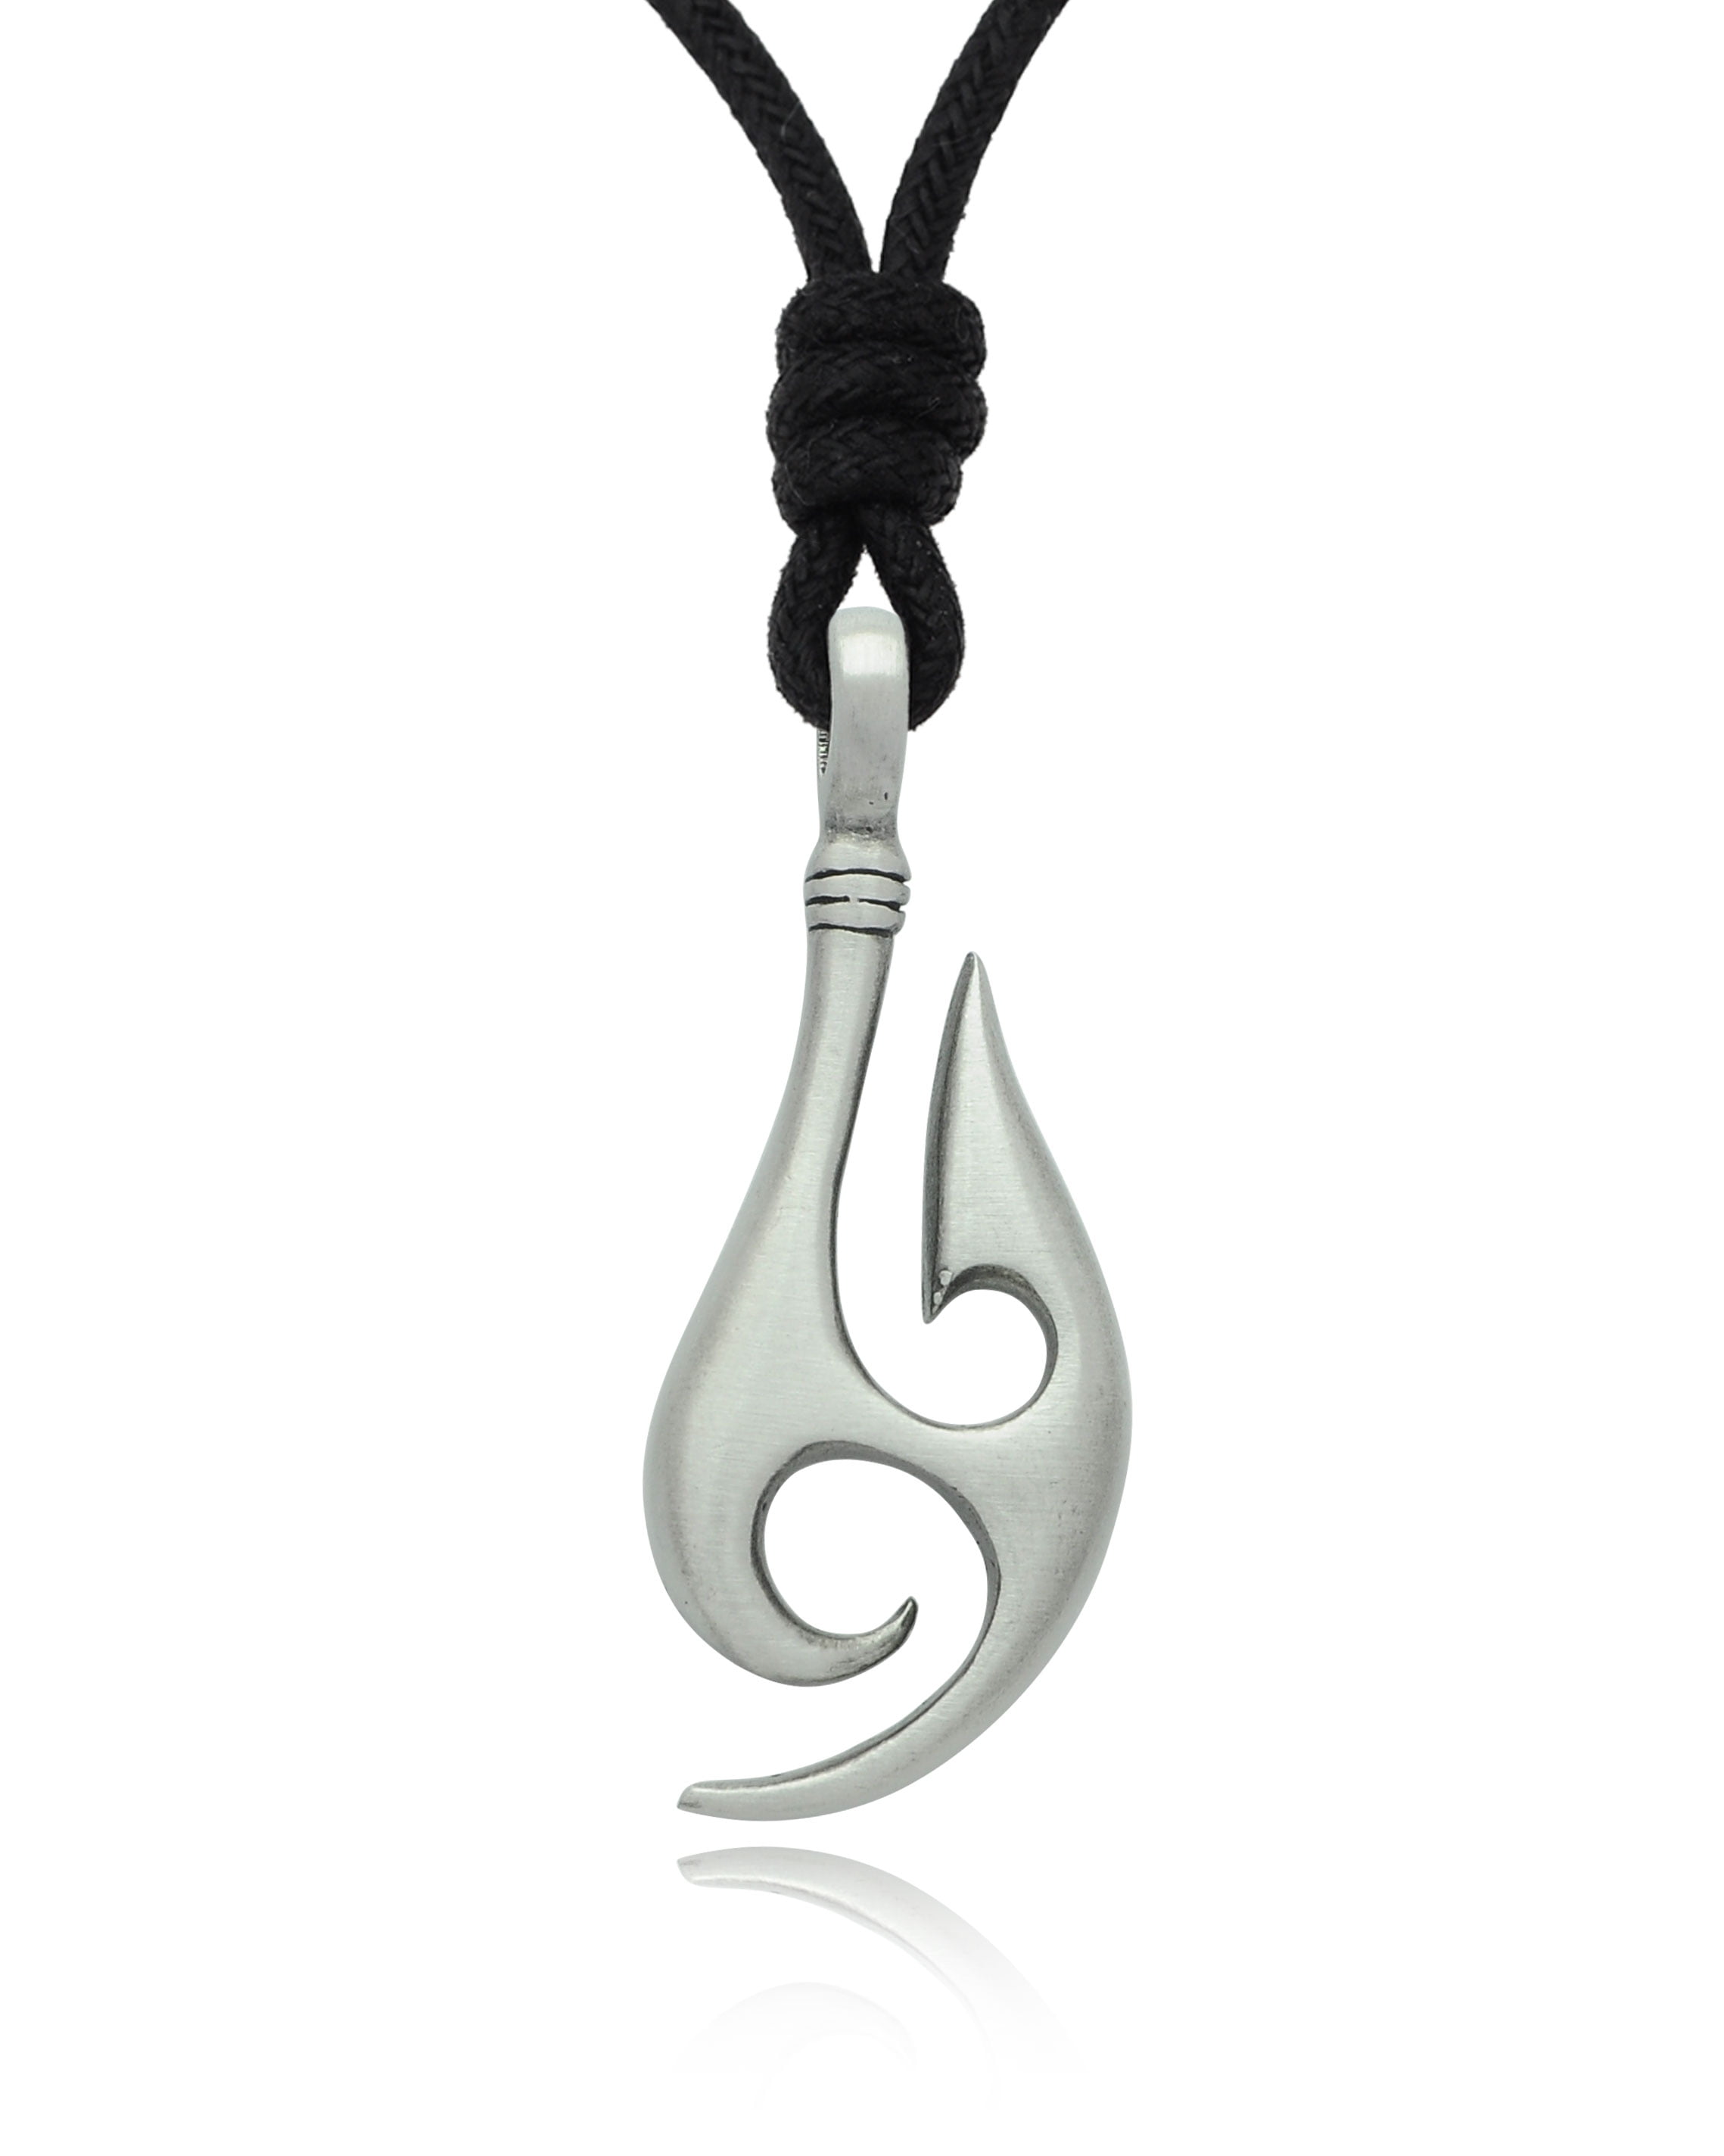 Stylish Maori Tribal Hook Silver Pewter Charm Necklace Pendant Jewelry With  Cotton Cord